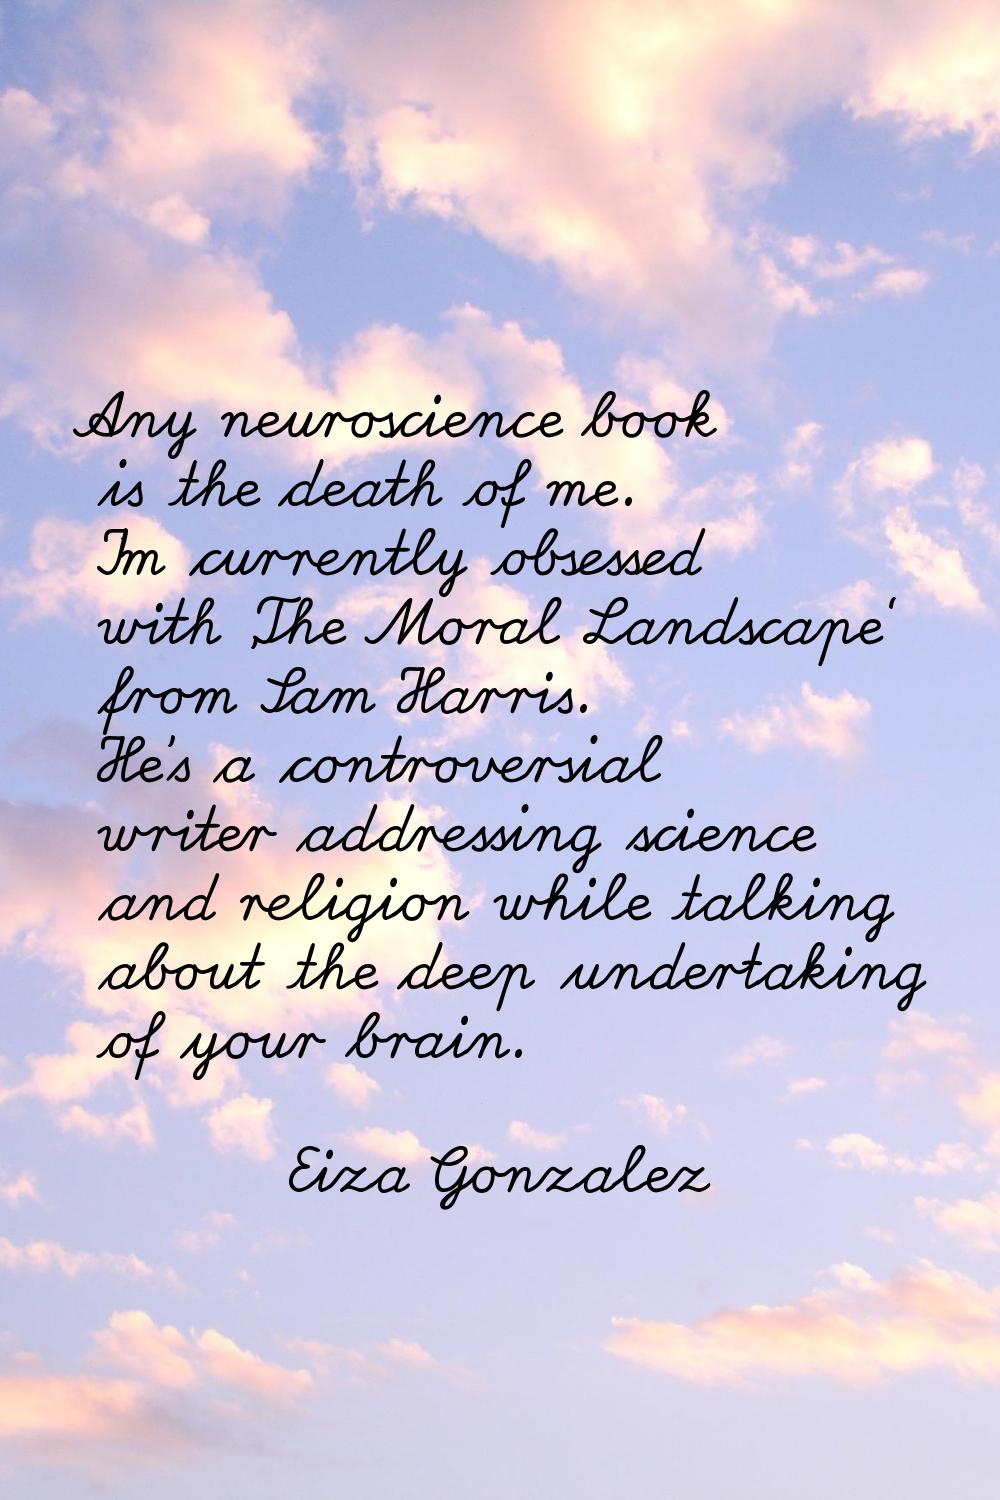 Any neuroscience book is the death of me. I'm currently obsessed with 'The Moral Landscape' from Sa